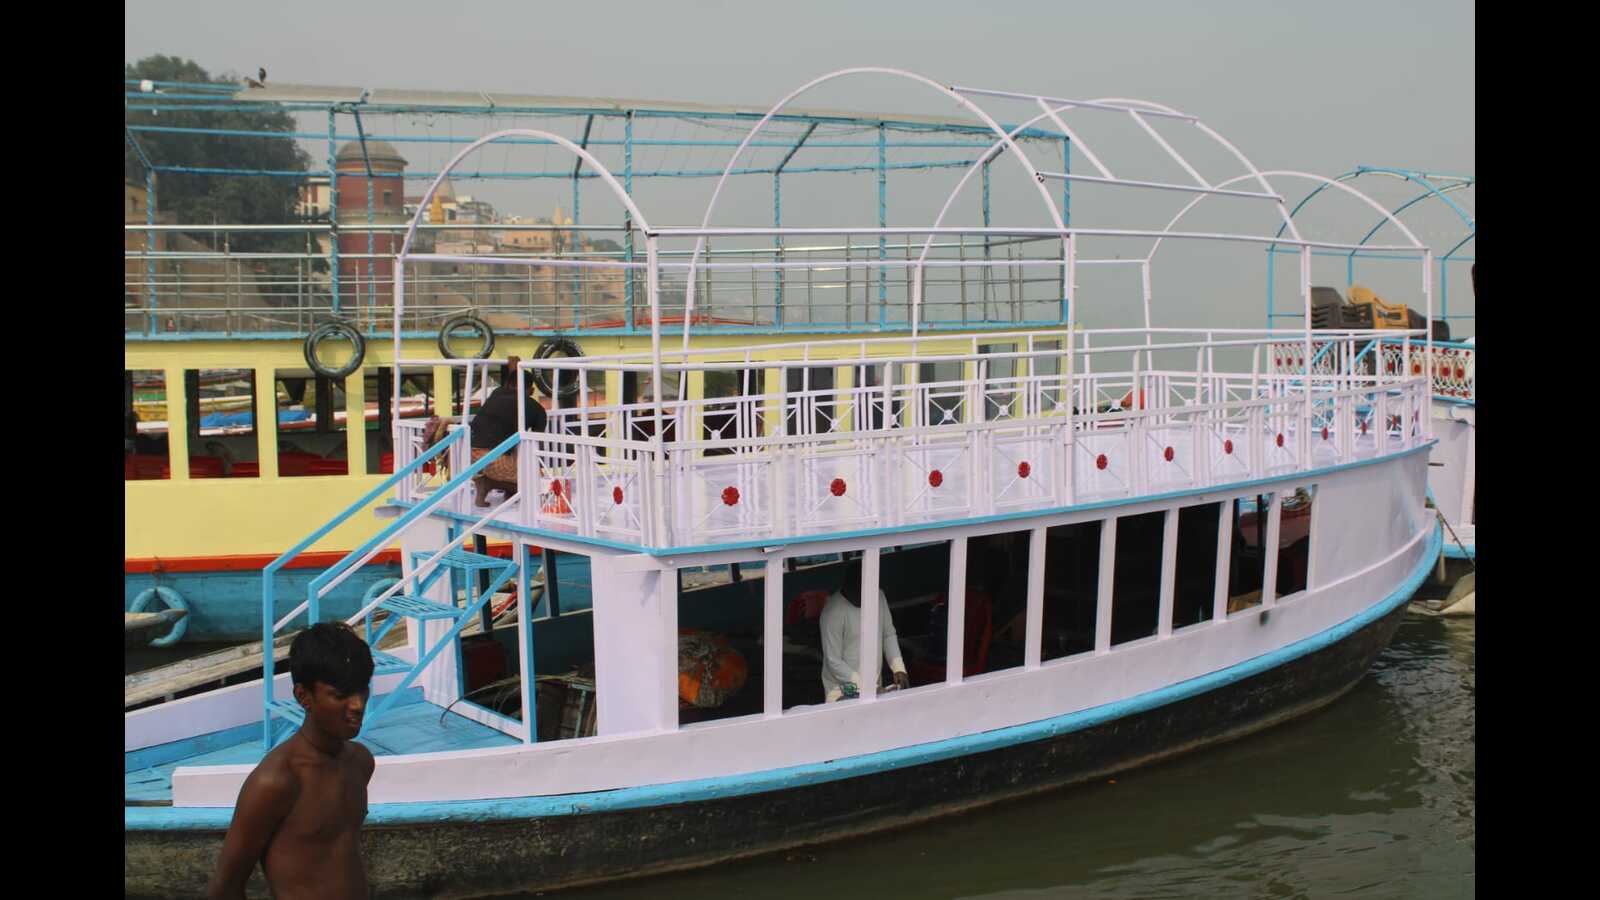 Bye-bye diesel, hello CNG: Conversion complete, ‘green’ boats on Ganga to cut down on pollution